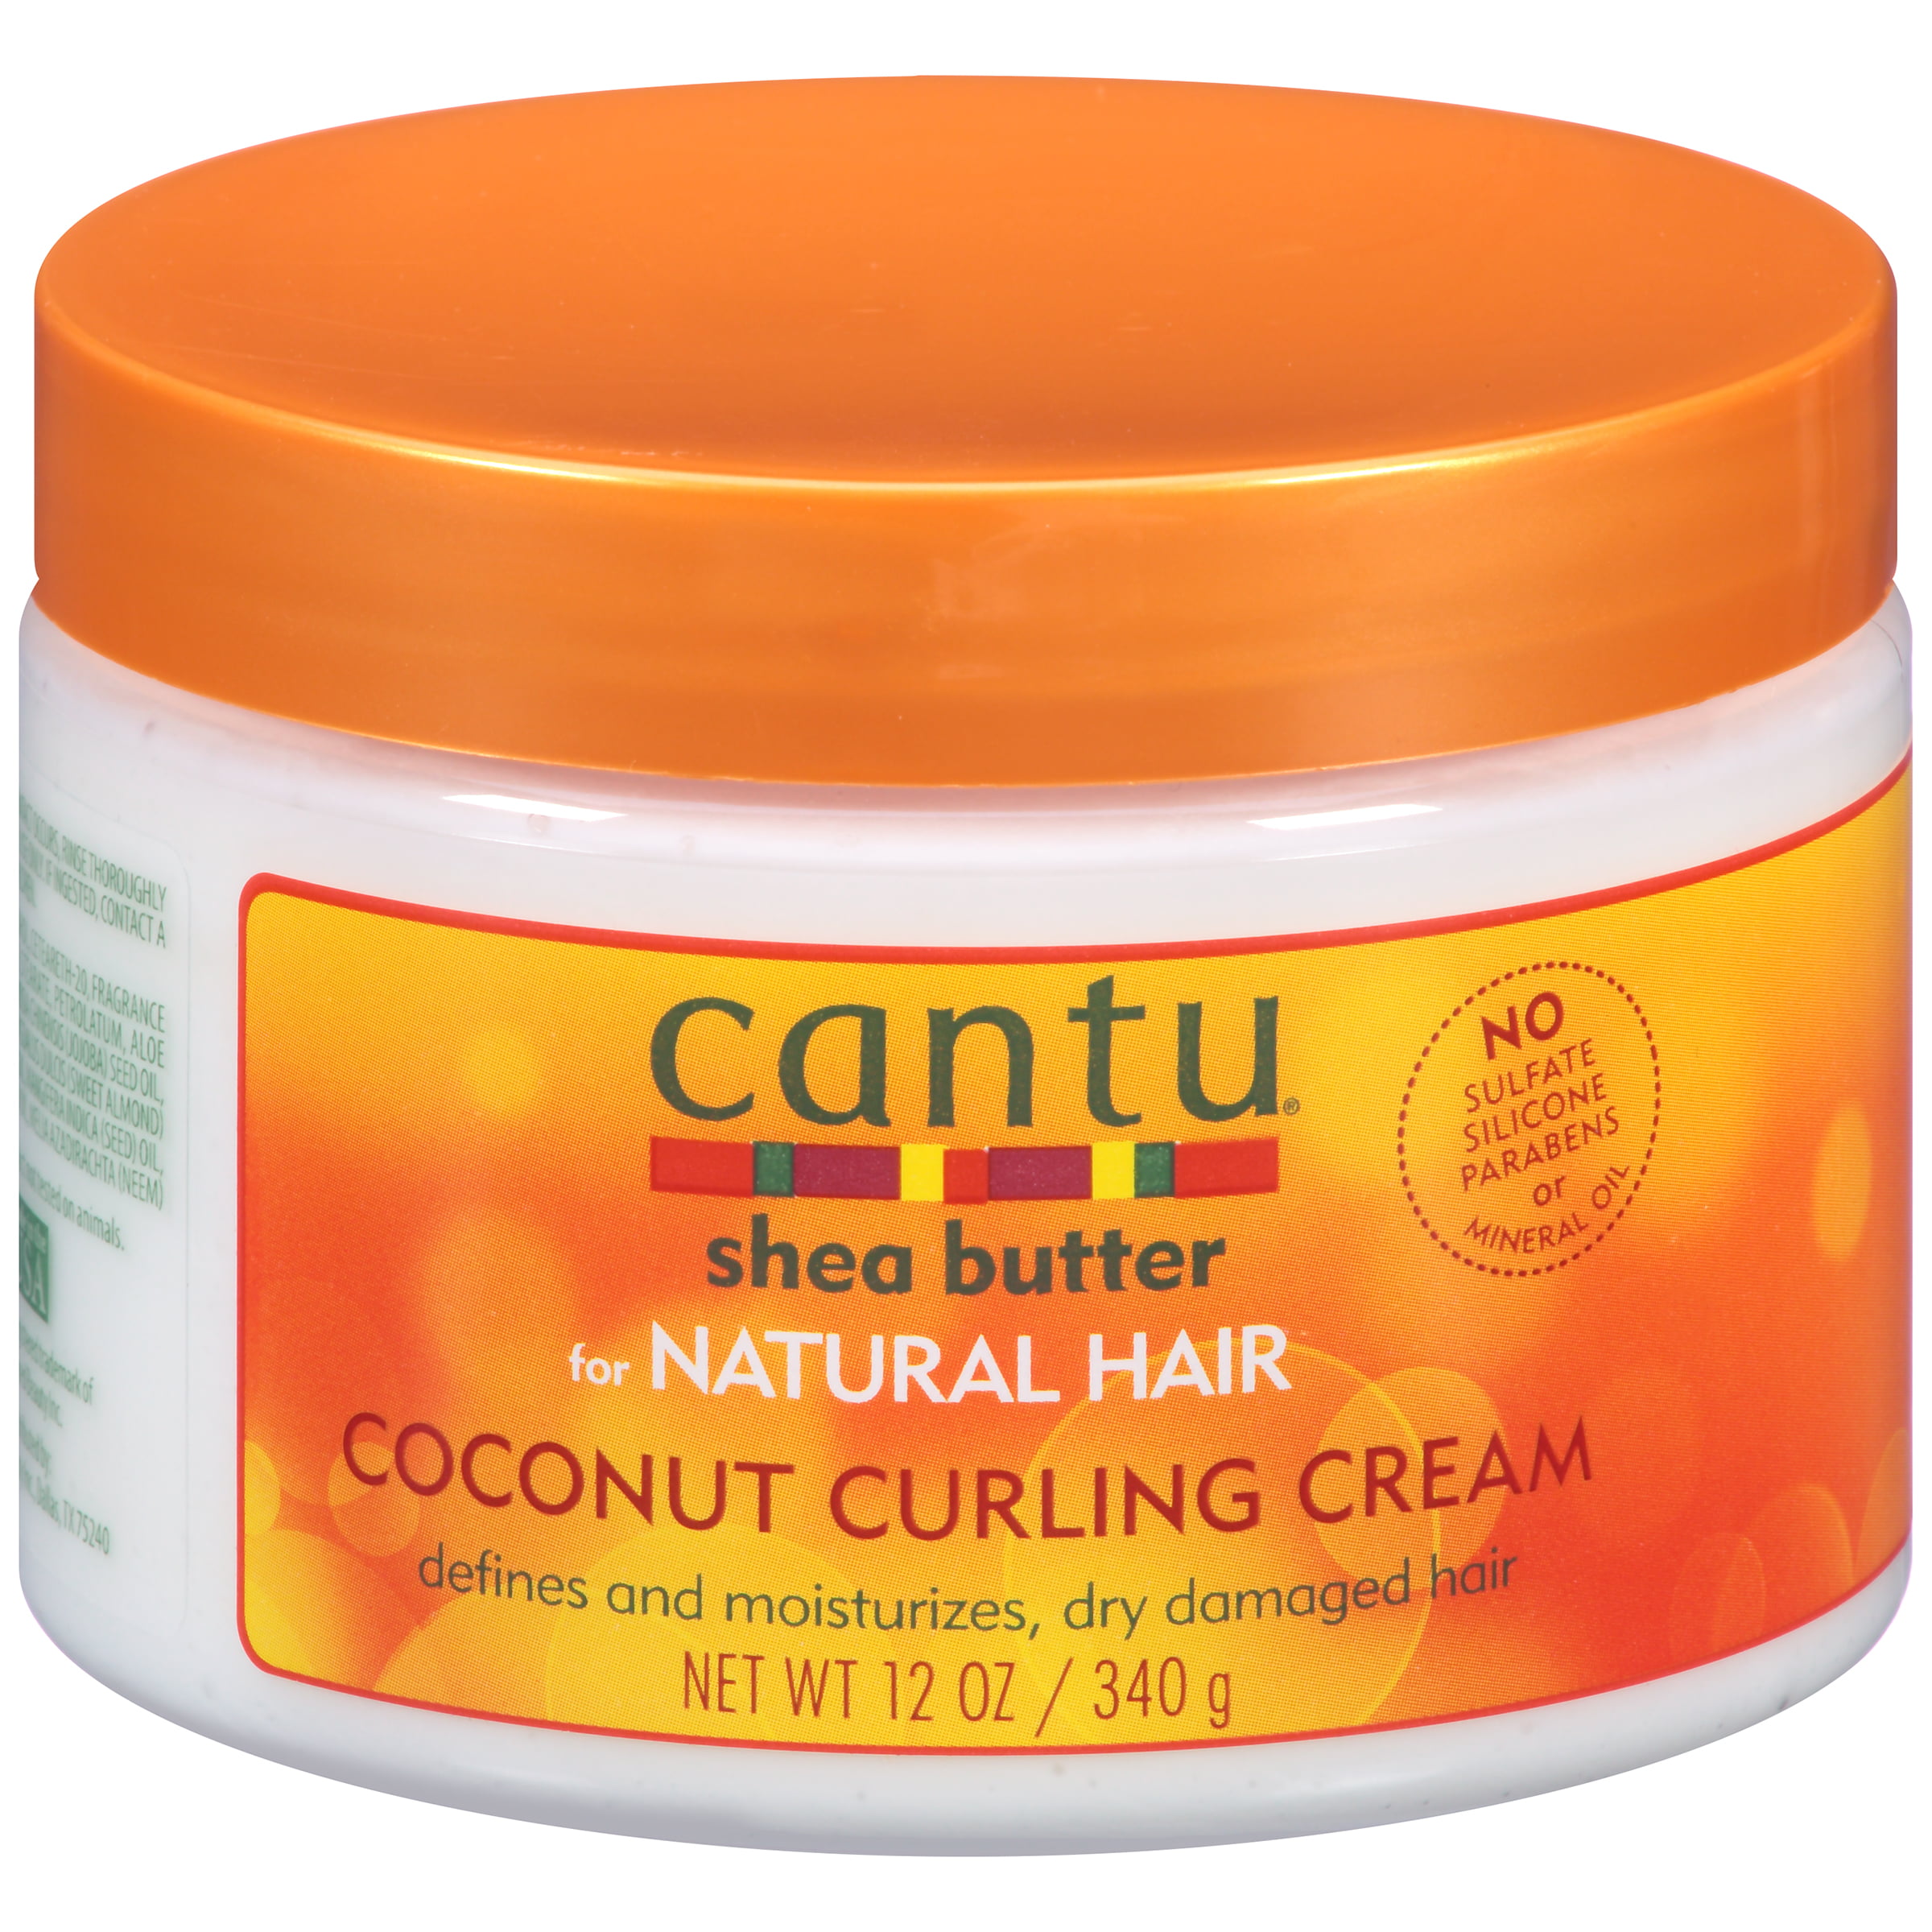 Image result for cantu hair products